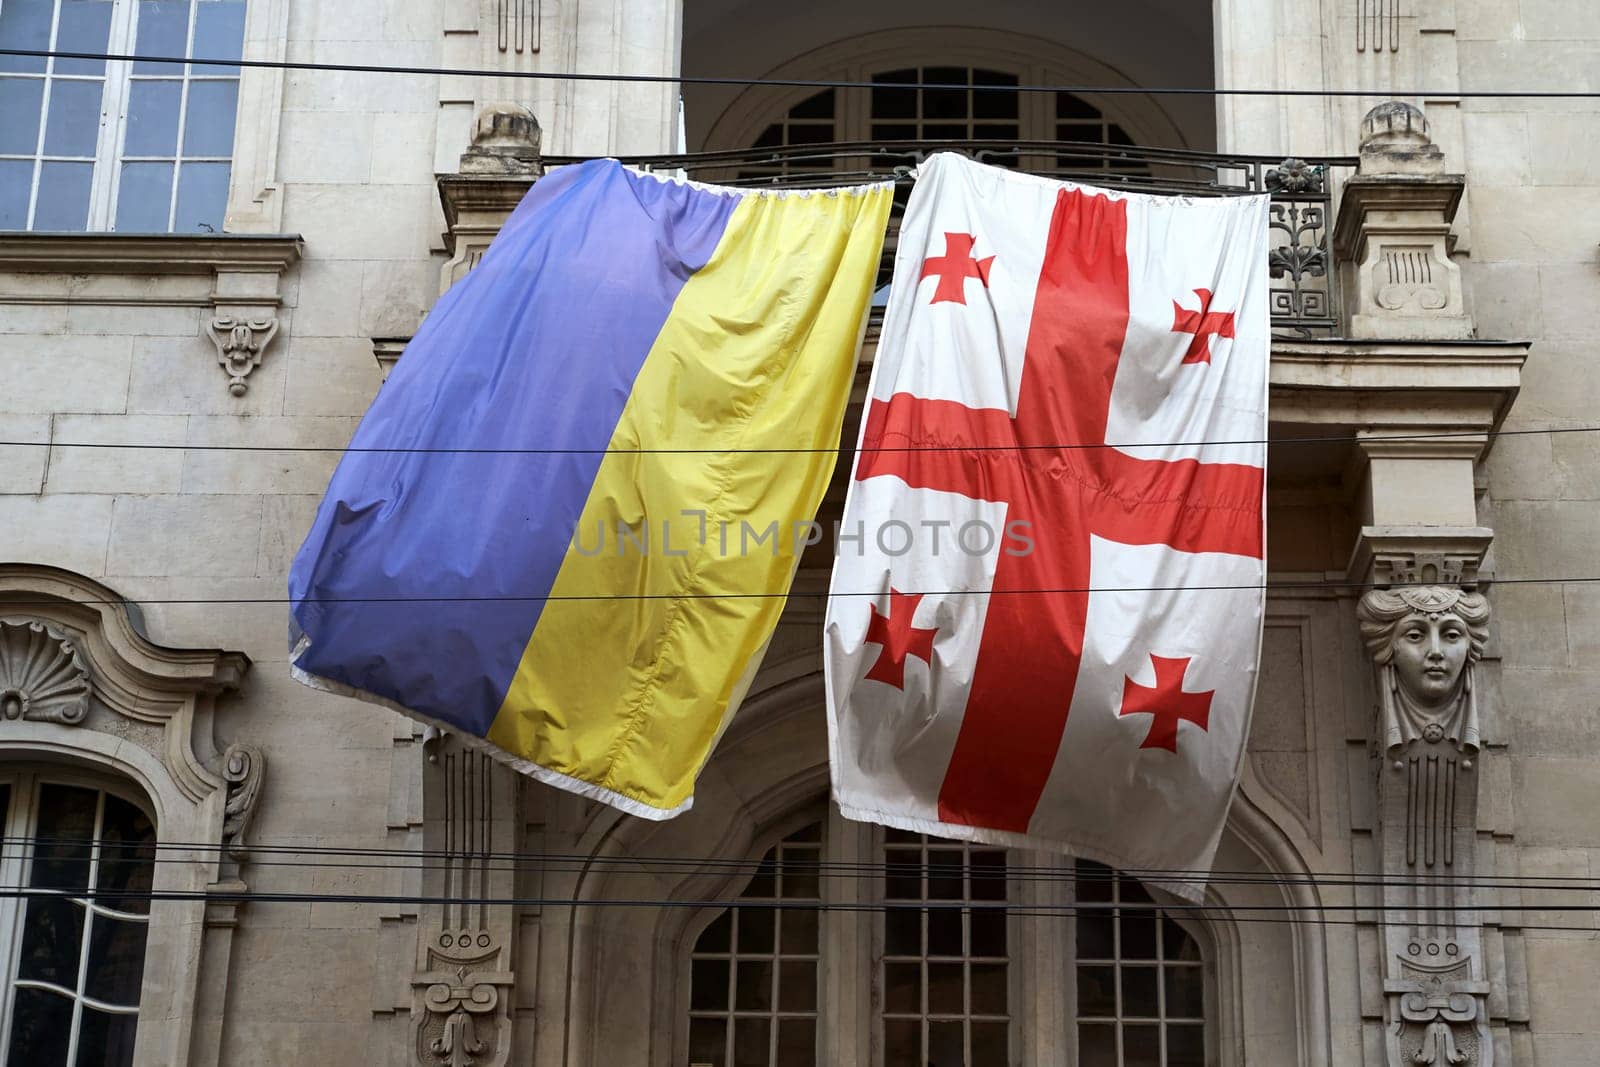 Flags of Ukraine and Georgia waving on the balcony of an old building in Tbilisi, Georgia by berezko